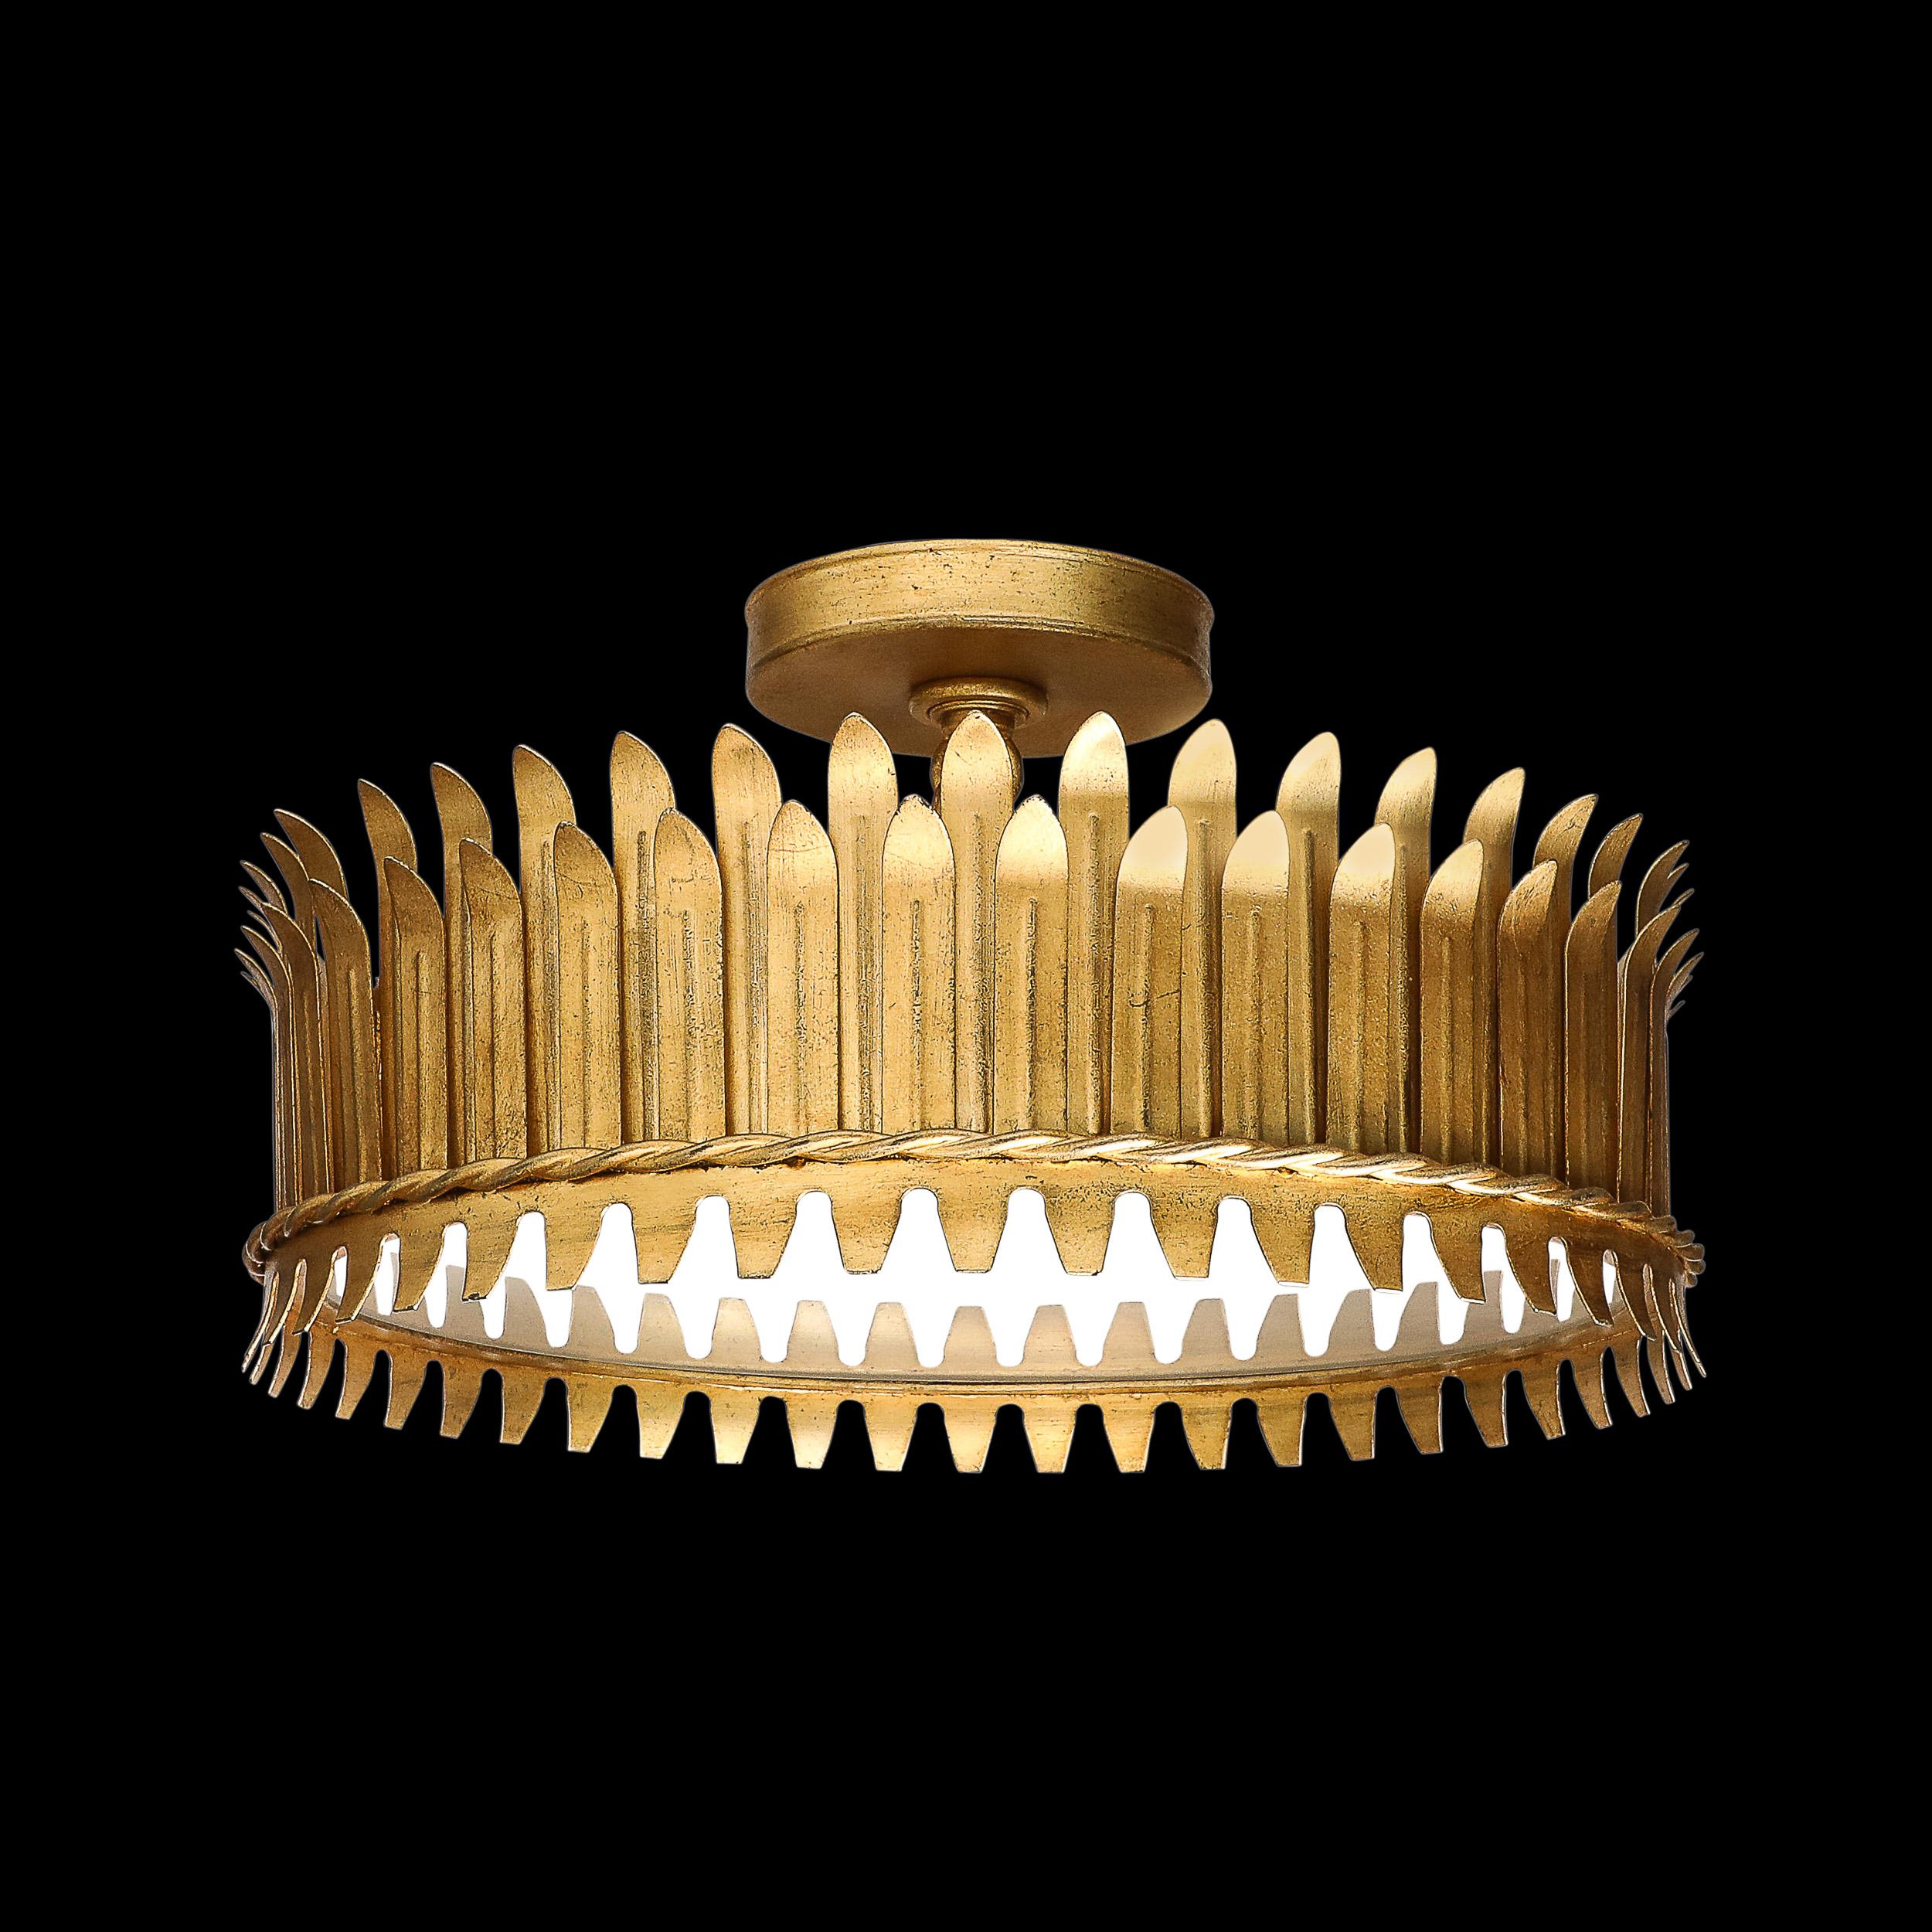 This glamorous and dynamic Mid-Century Modernist Geometric Feather Form Flush Mount Chandelier in Brass & Frosted Glass originates from the United States, Circa 1960. This piece features a cylindrical body with crenelated top and bottom edges